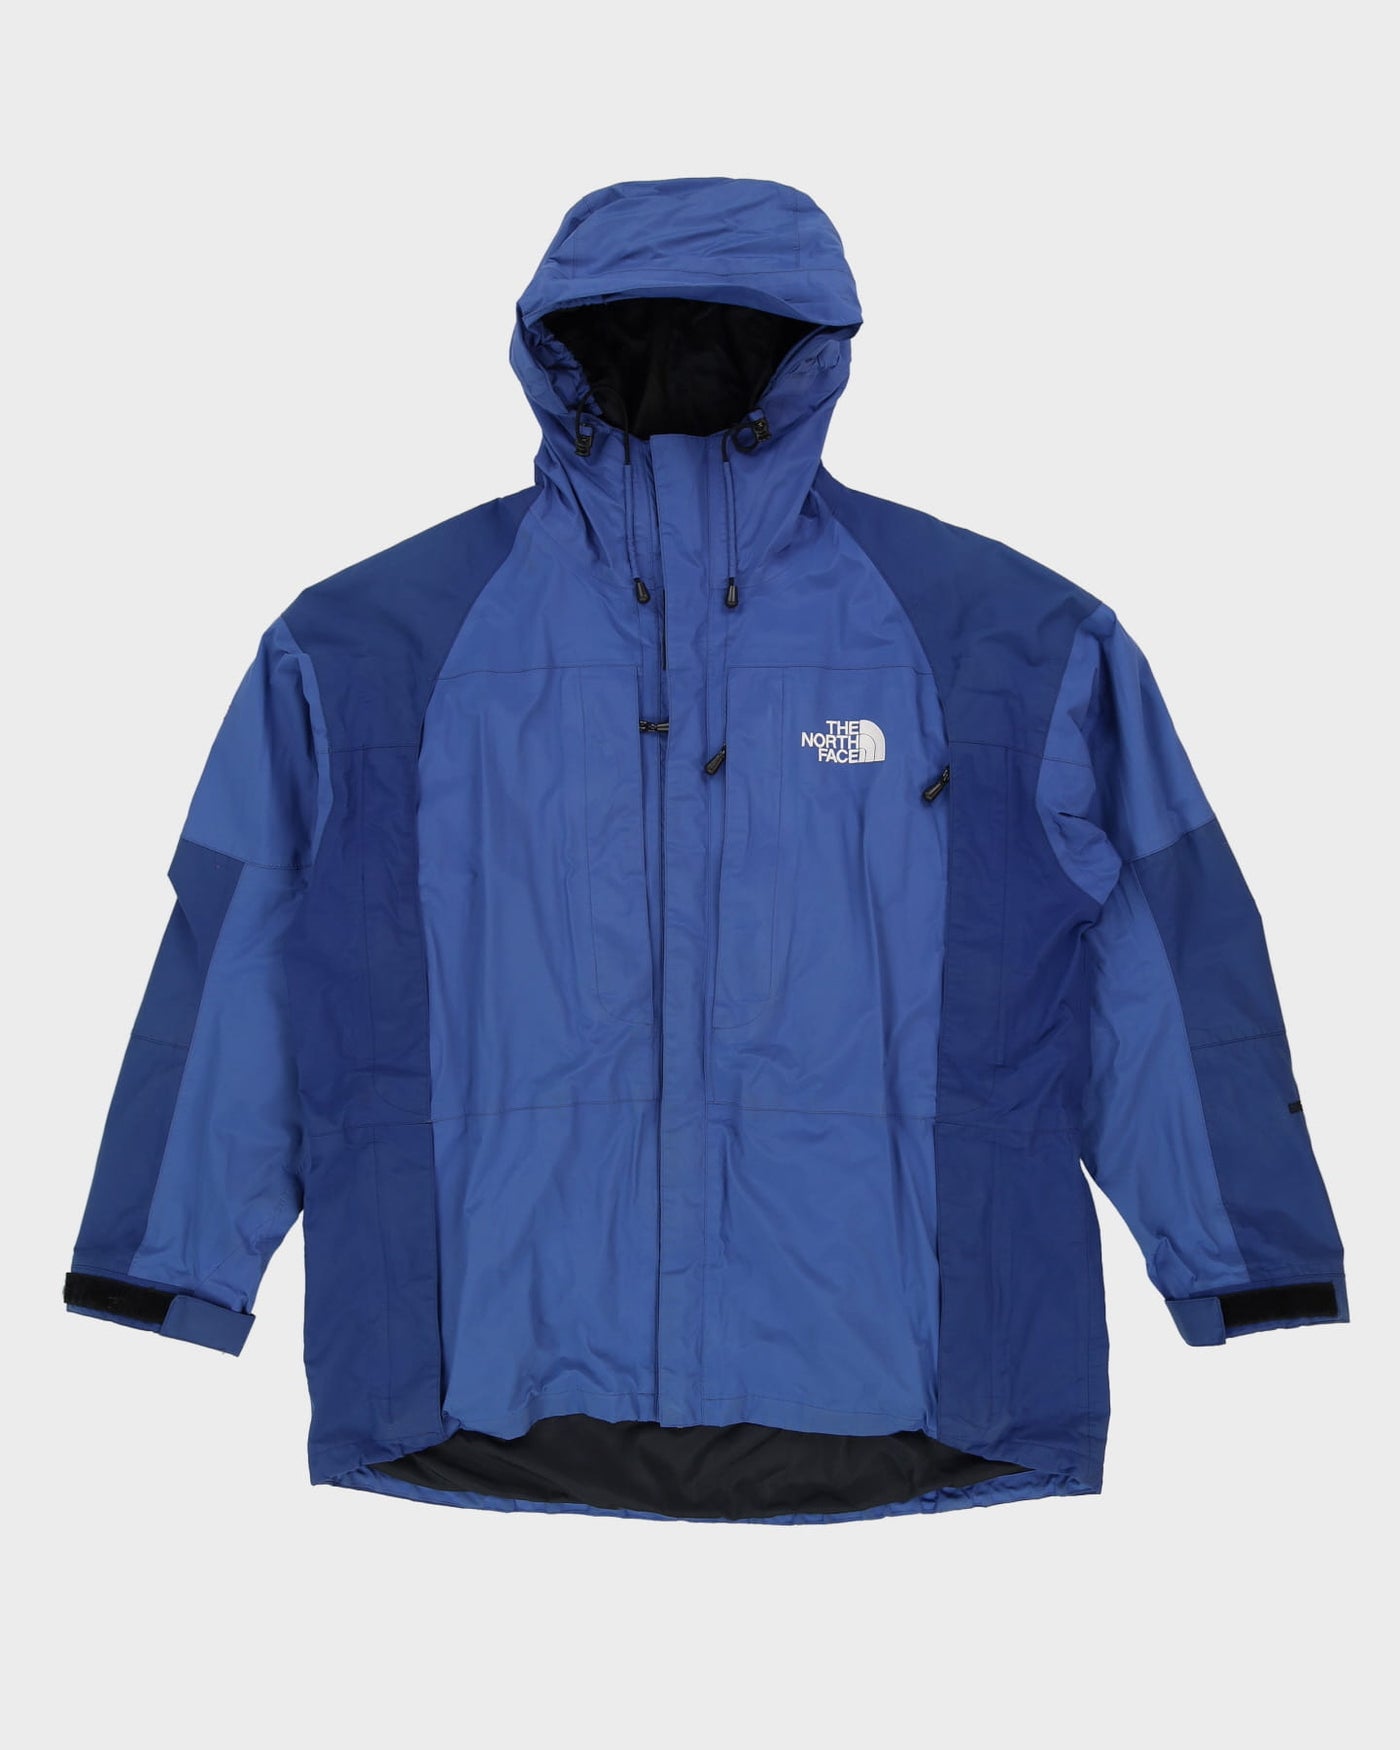 The North Face Summit Series Blue Hooded Full-Zip Anorak - XXL